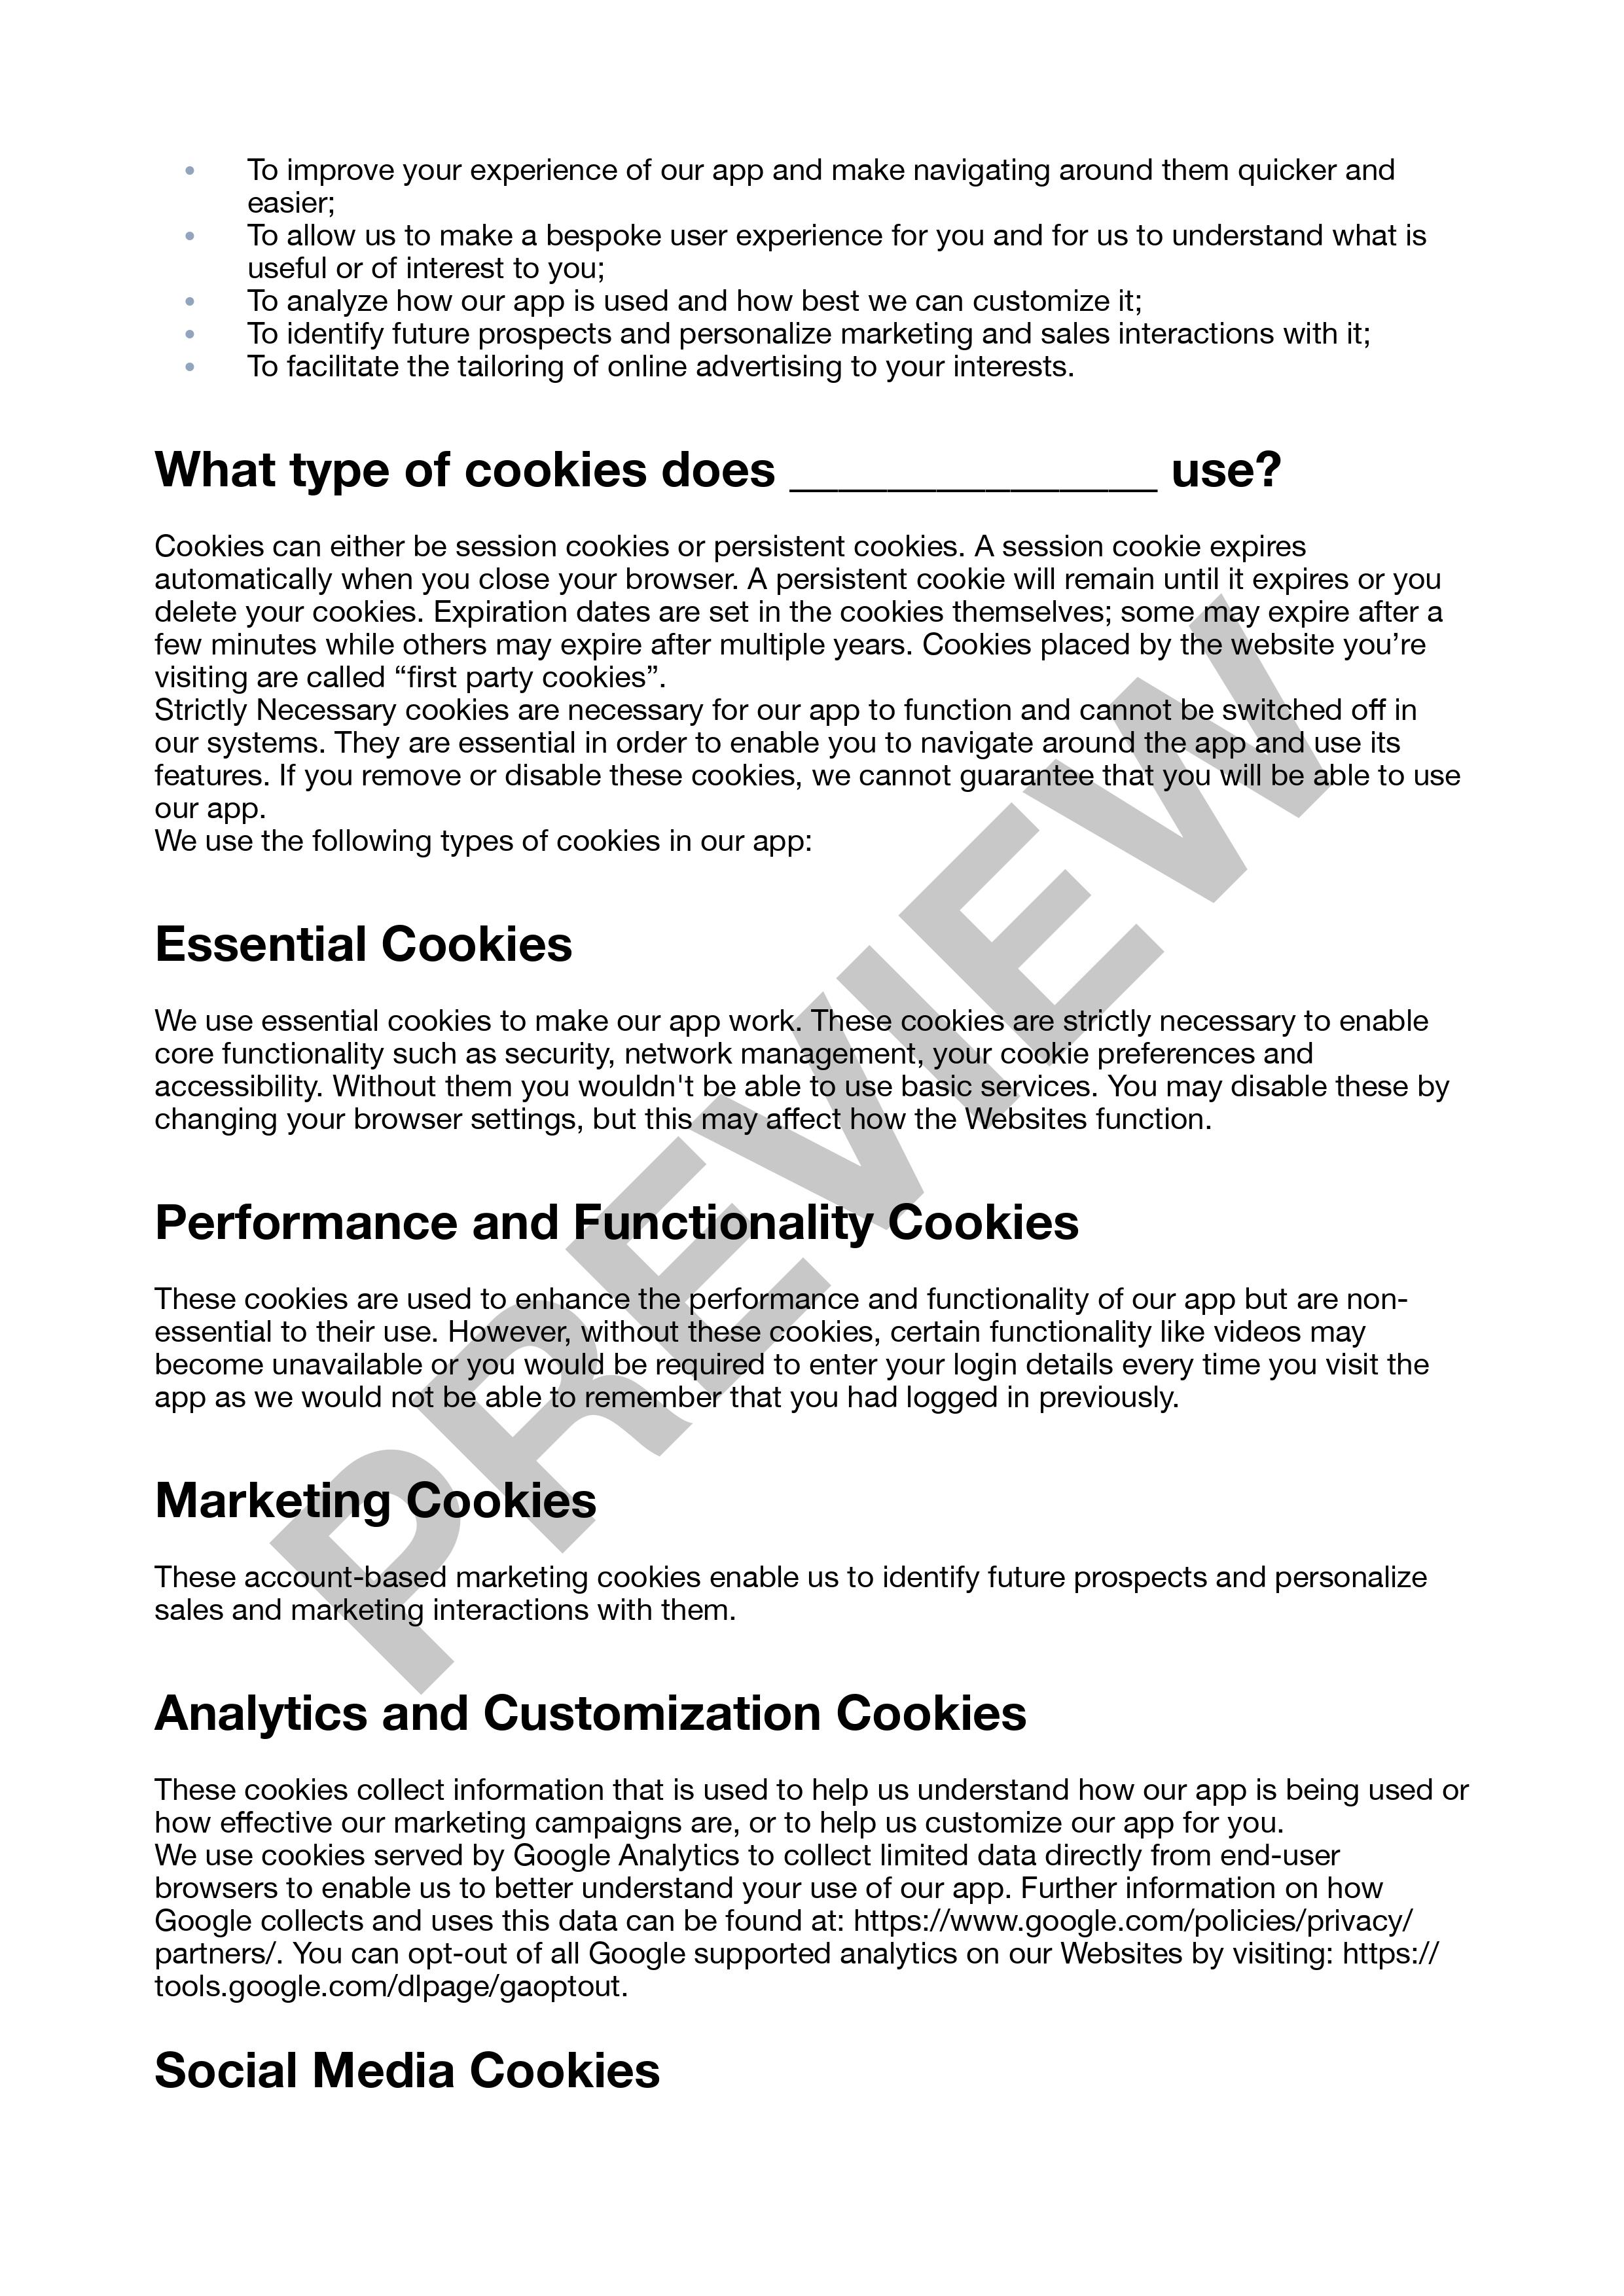 Preview Cookie Policies